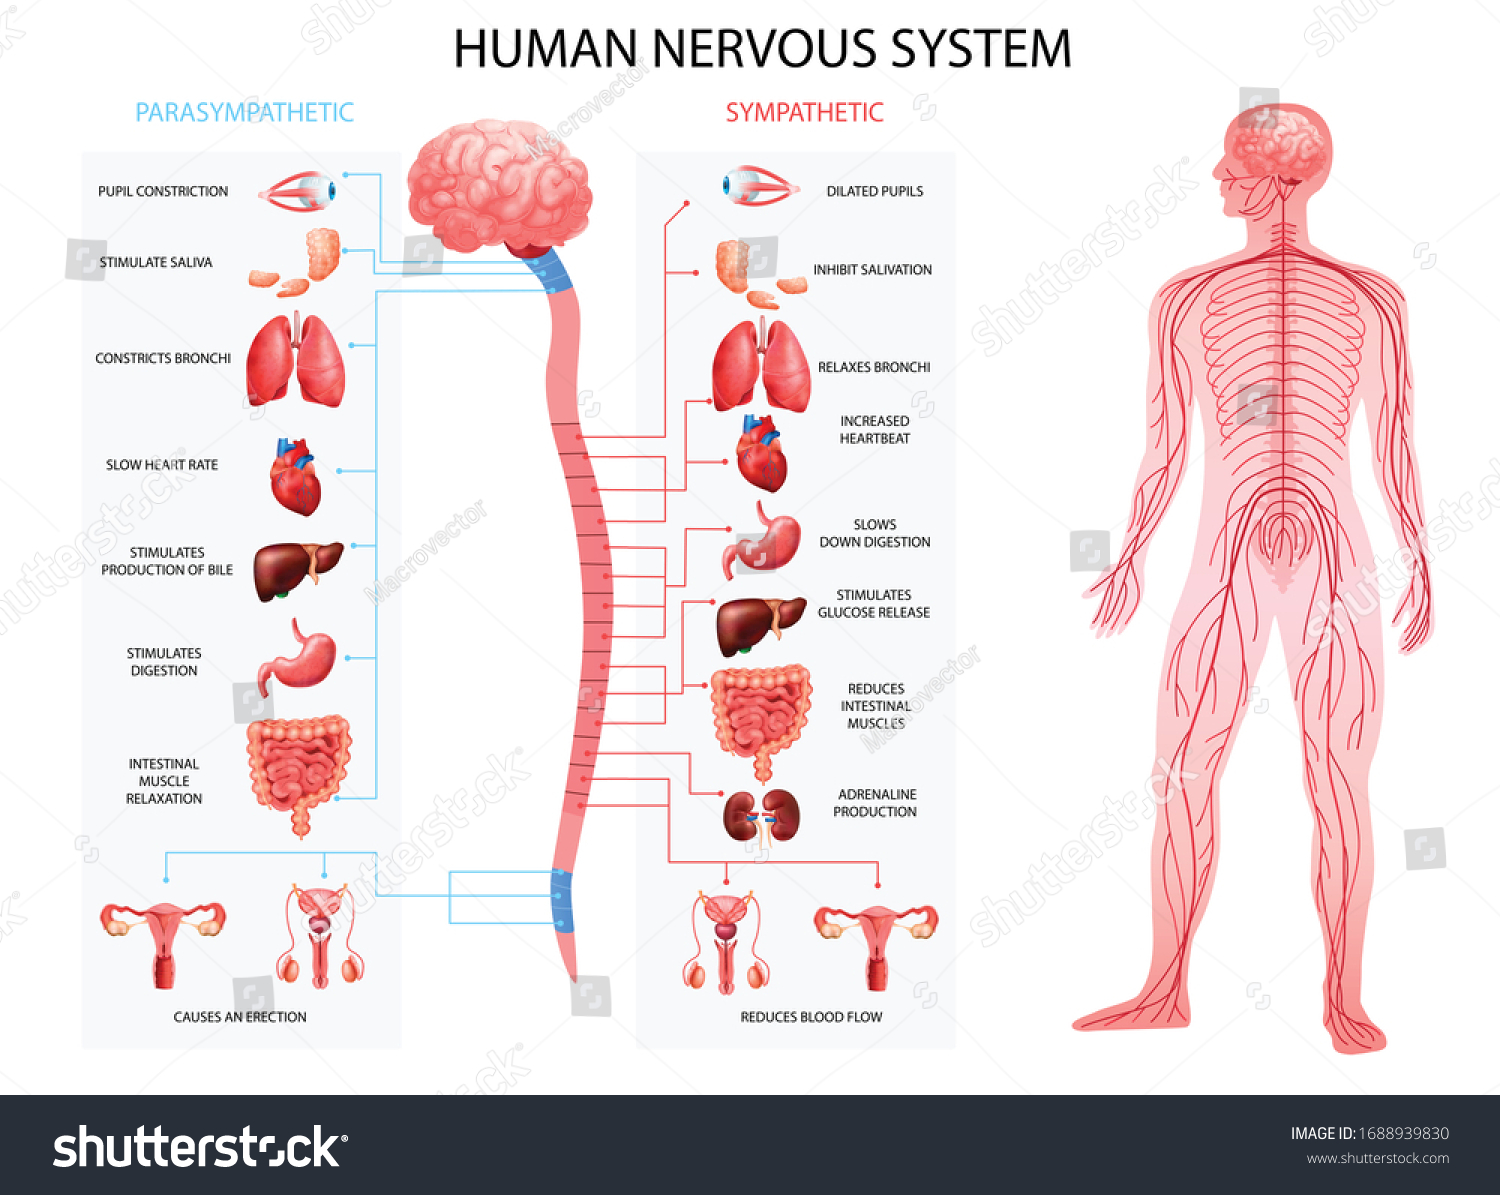 Human body nervous system sympathetic parasympathetic charts with realistic  organs depiction and anatomical terminology vector illustration  #1688939830